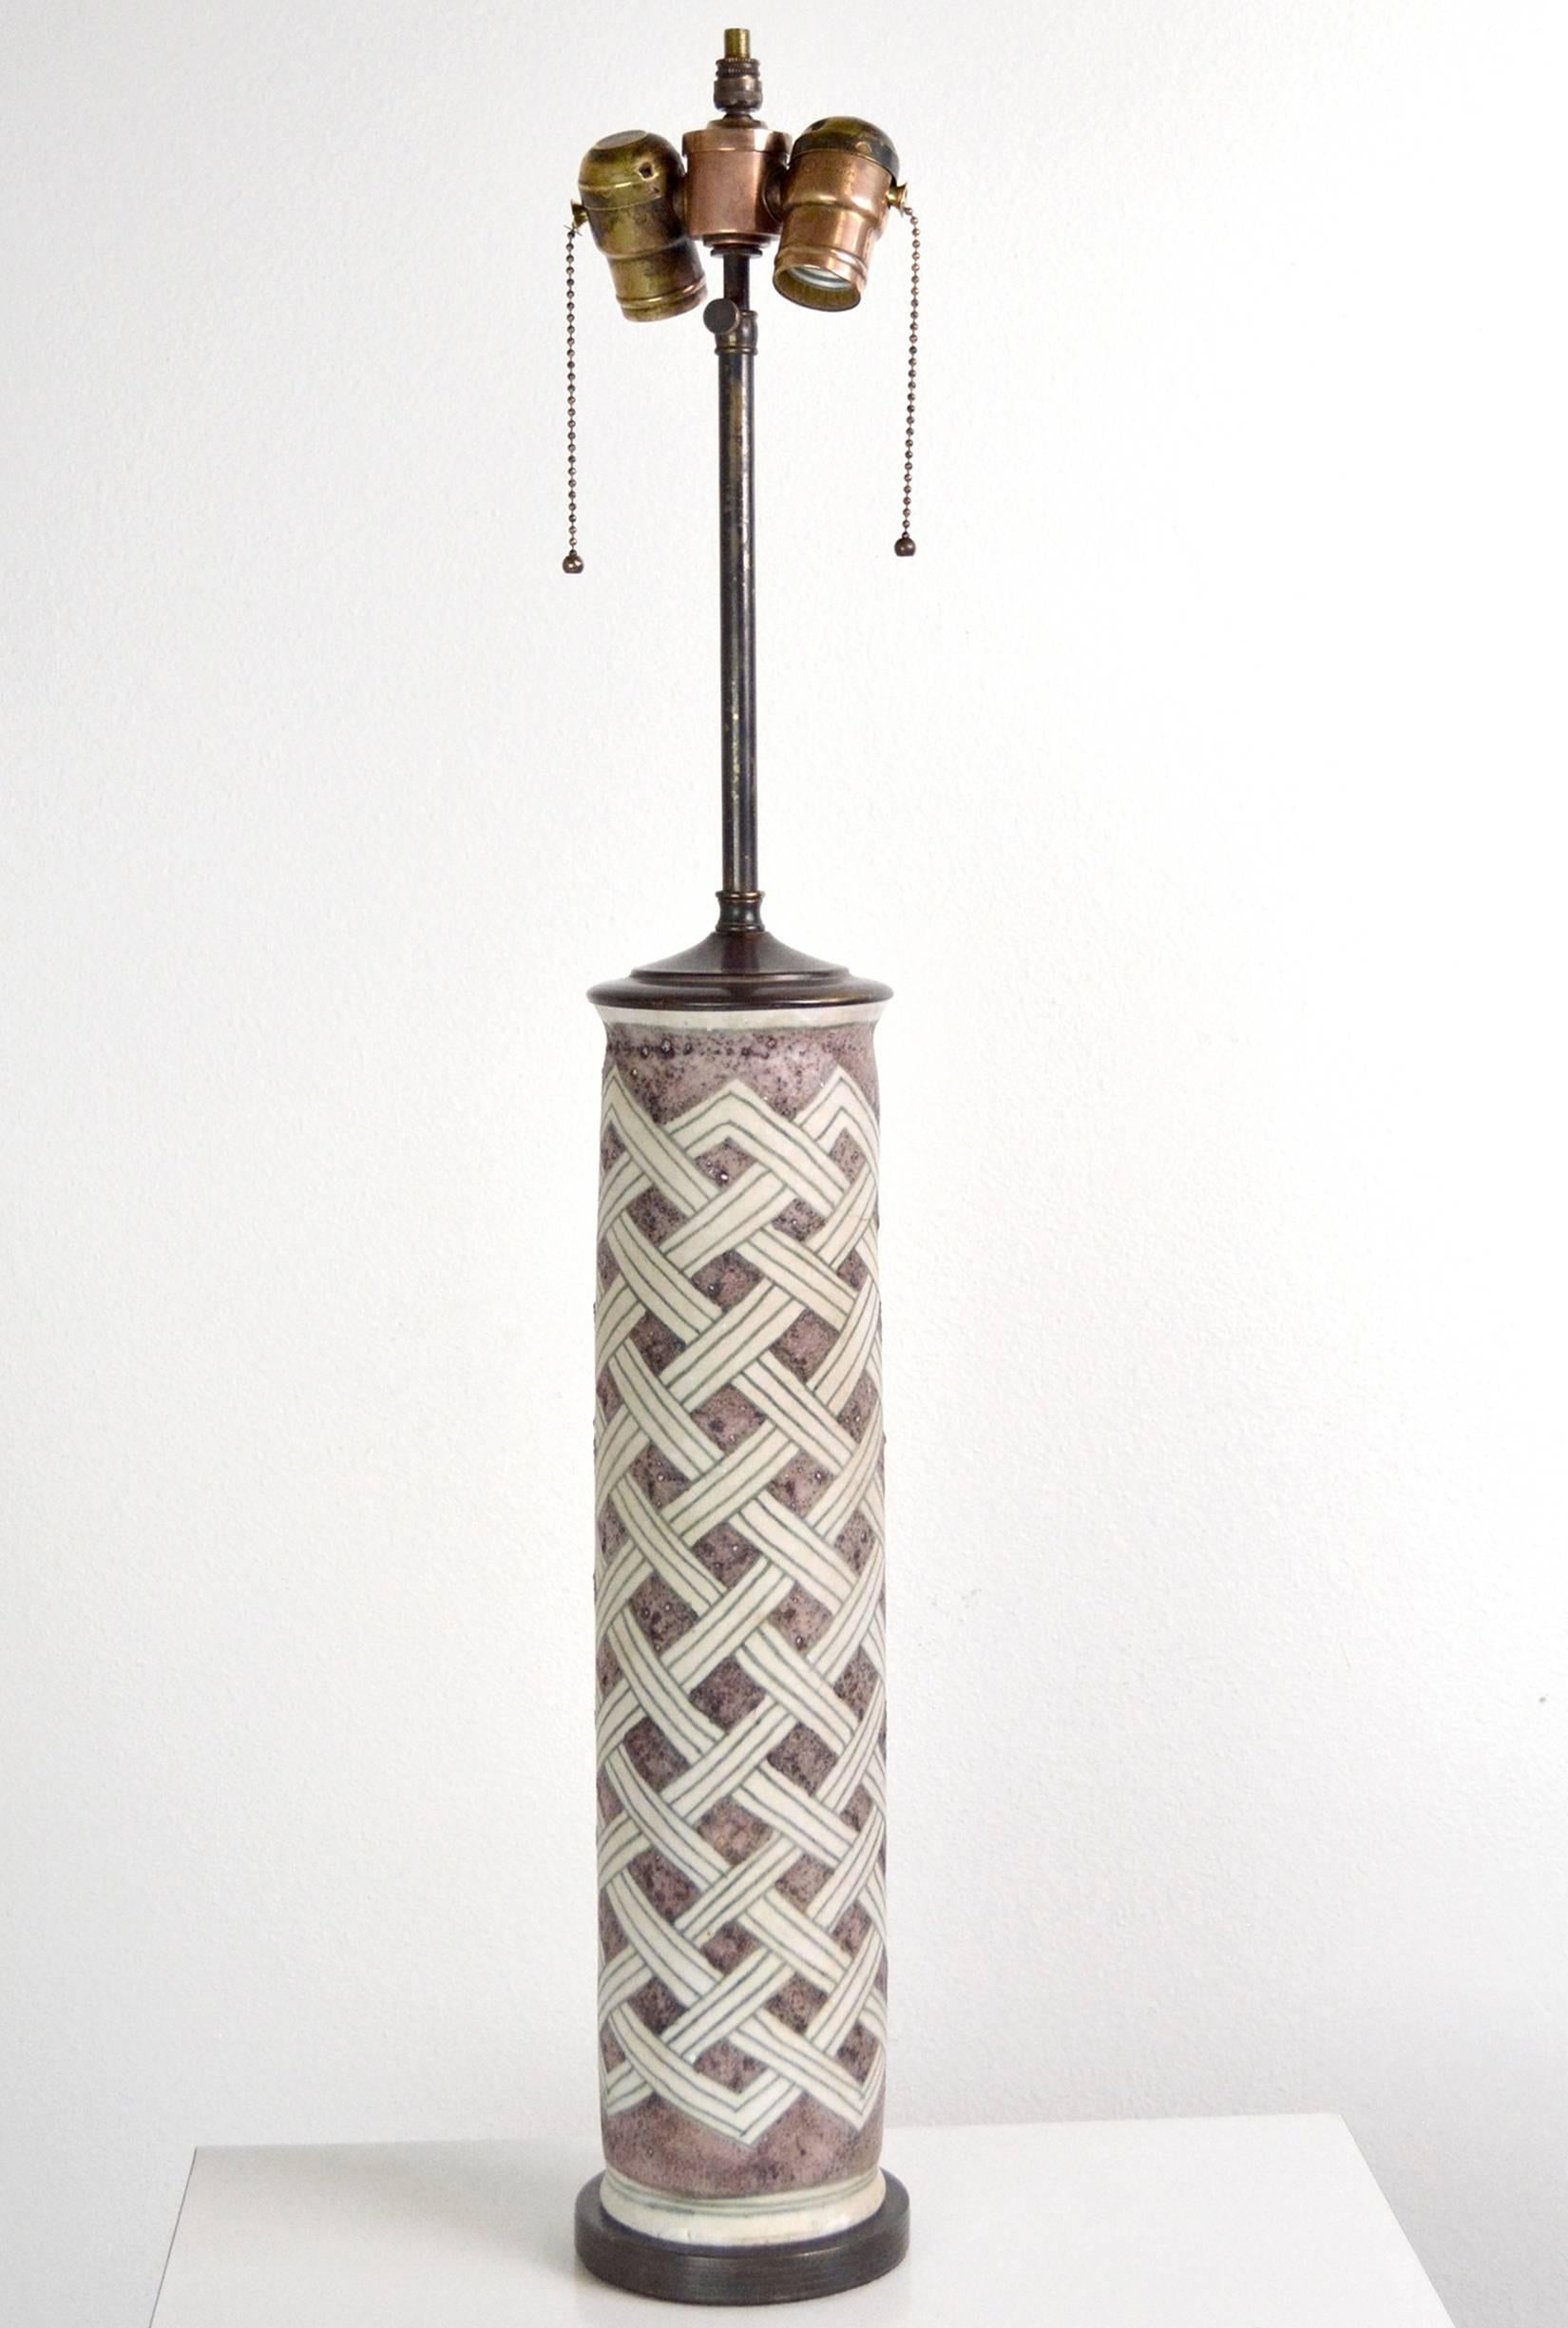 A pair of signed Guido Gambone lamps in a lovely amethyst brown and ivory glaze. Tall cylinders with a trellis pattern are mounted on ribbed antiqued brass bases with new double cluster sockets. Signed with donkey cipher, base only, 18” H x 4"